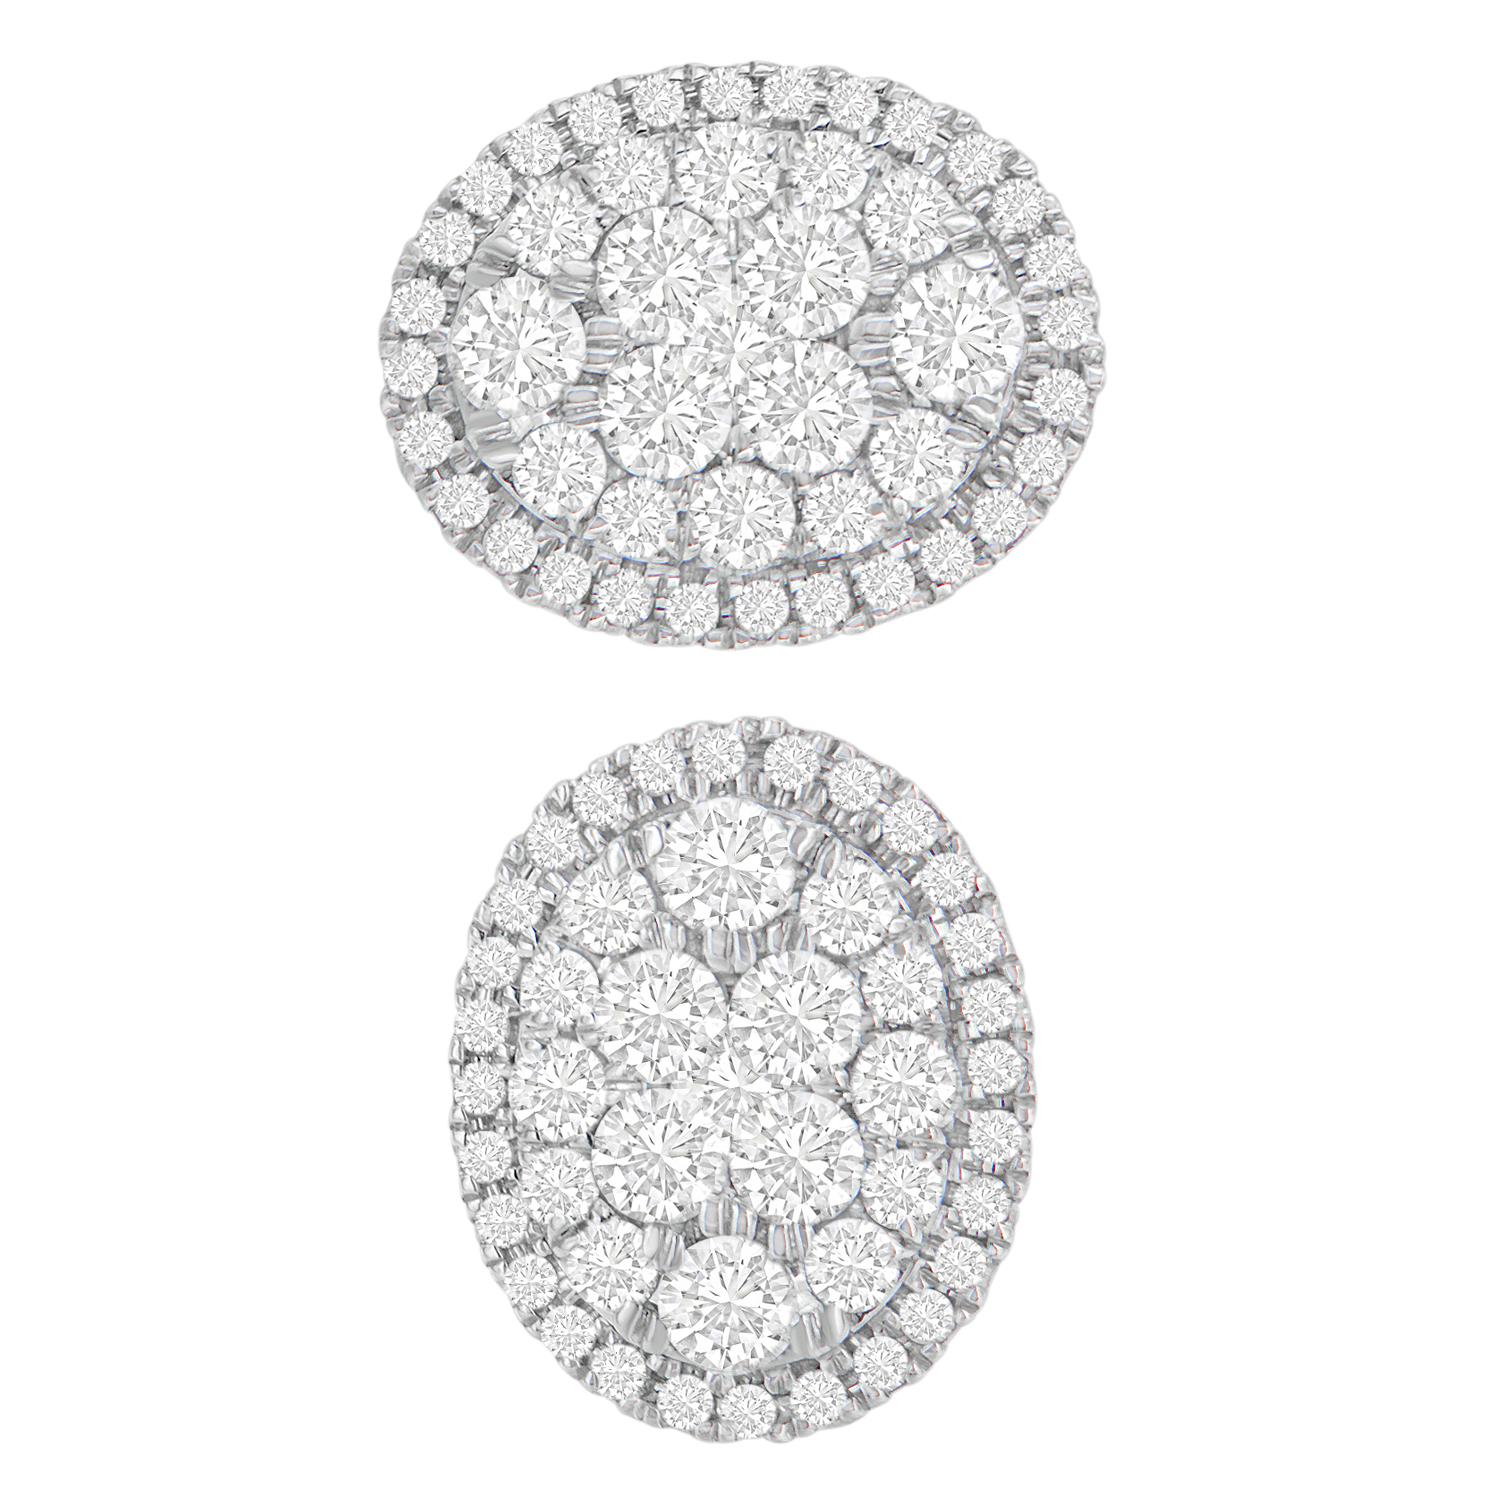 Brilliant to wear with any attire, these diamond earrings makes a stunning addition to your jewelry collection. Designed with elegance, the lovely pair of earrings is fashioned in the oval shape and crafted of 14 karats yellow gold with white